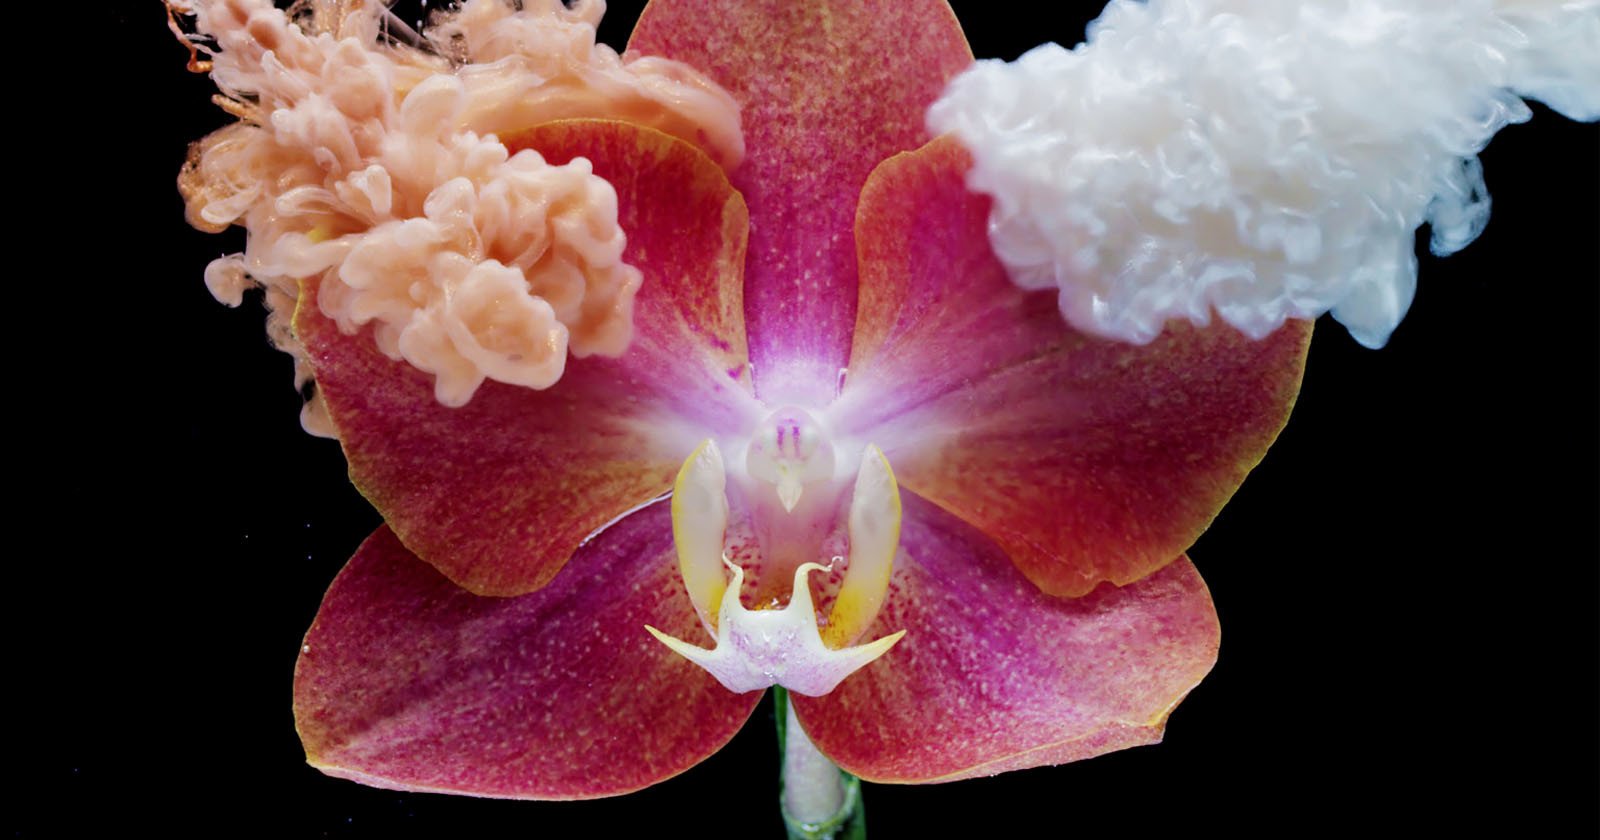 Gorgeous Timelapse of Flowers and Insects Took Six Months to Create